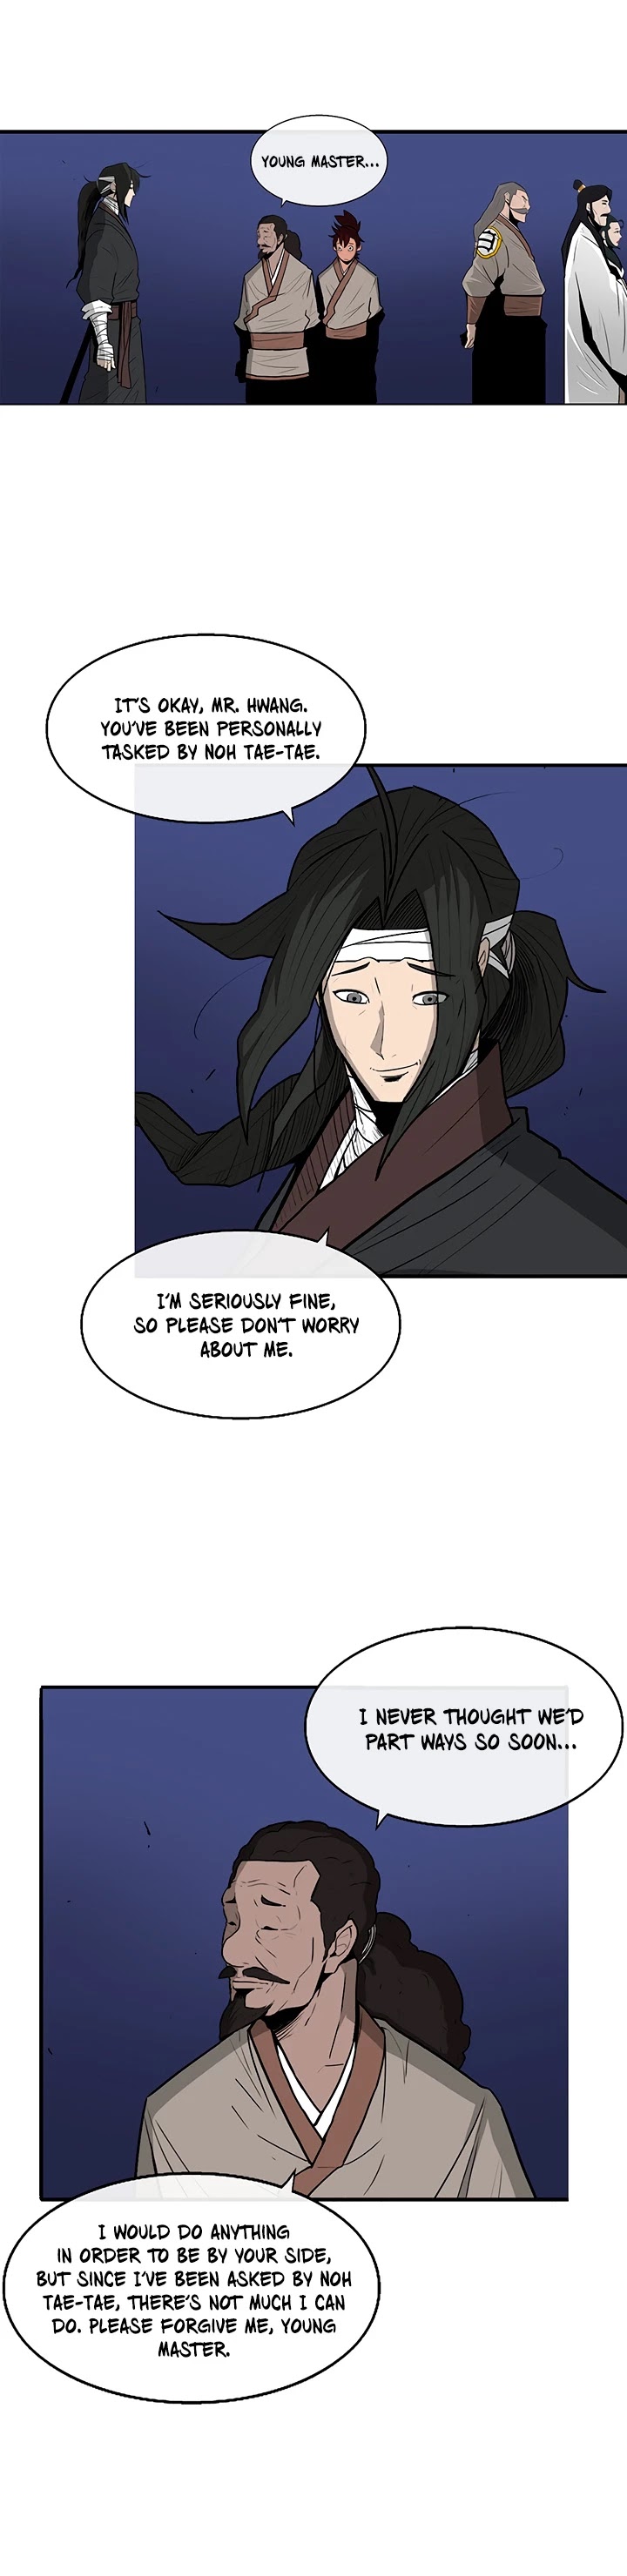 Legend Of The Northern Blade Chapter 70